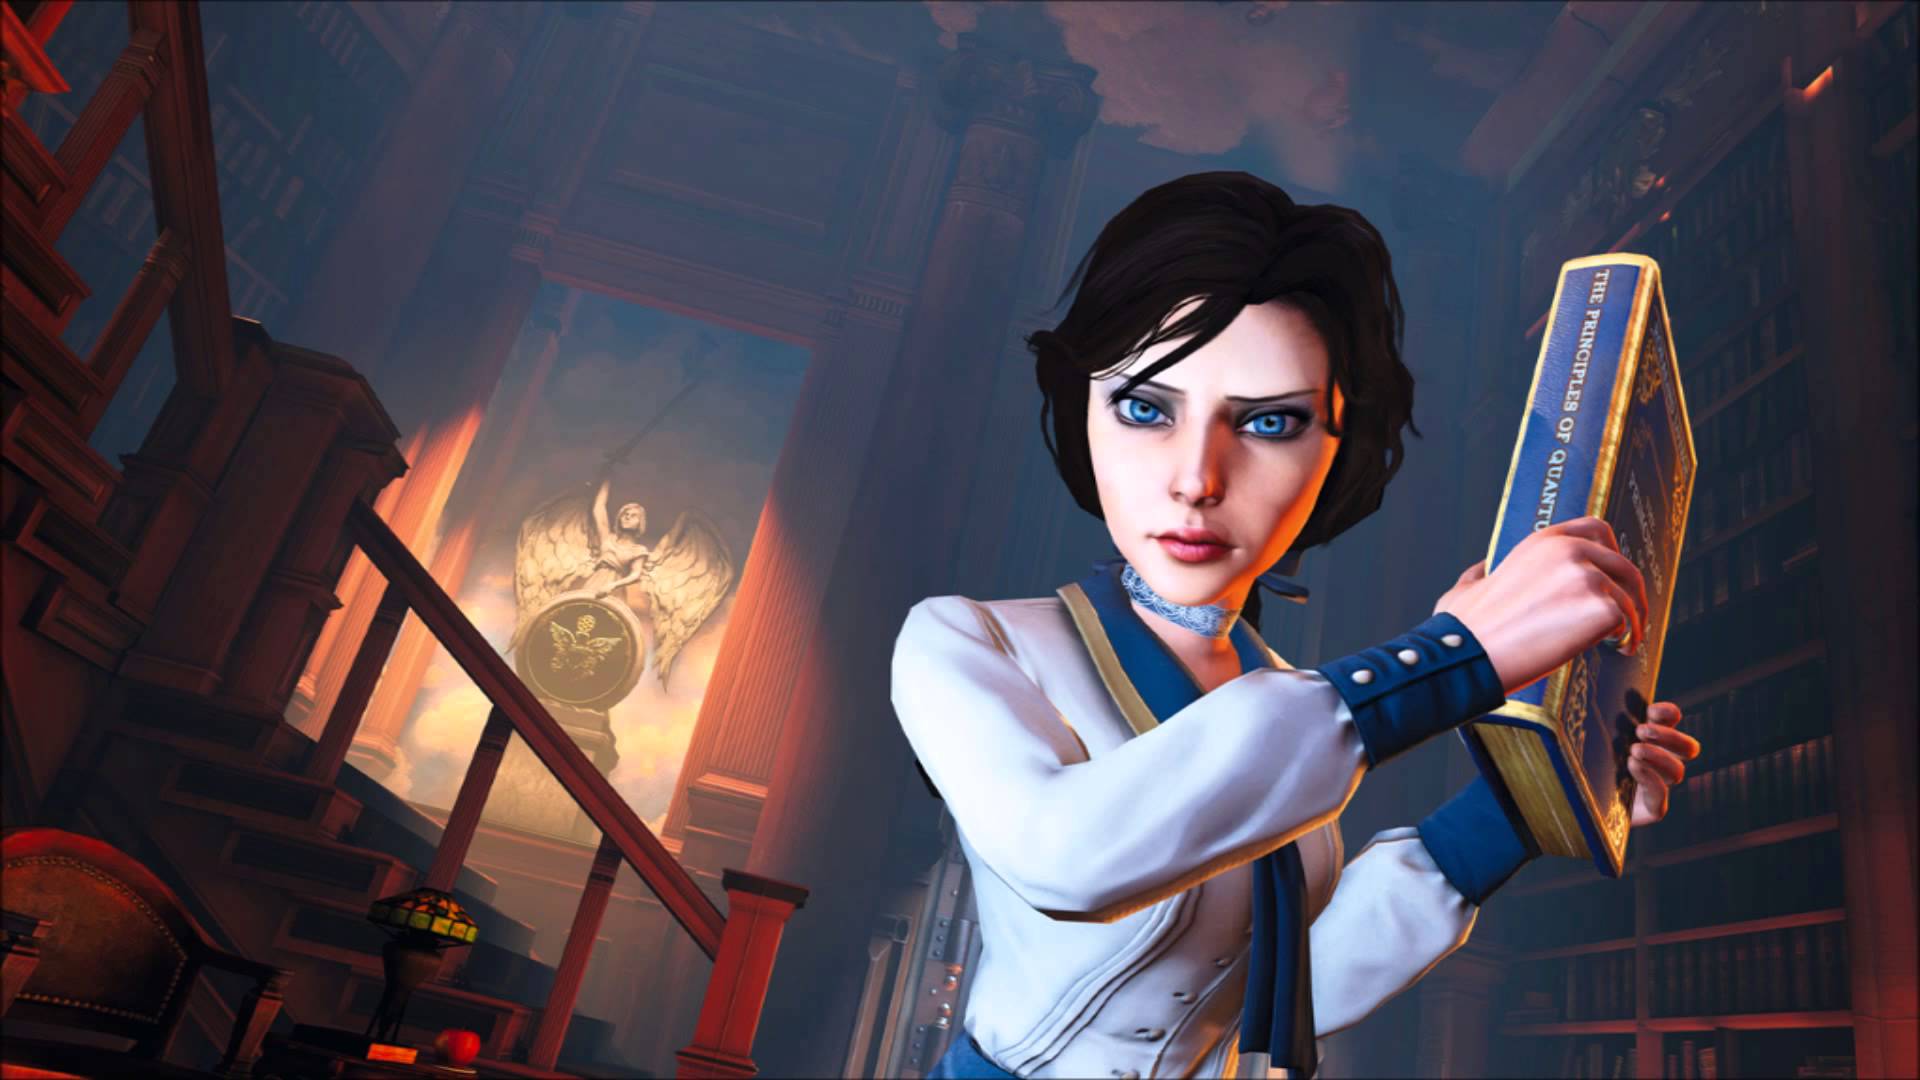 Ken Levine AMA Talks BioShock Infinite, Burial at Sea DLC & Release Date,  The Future, PS4/Xbox One, Elizabeth Porn, Weapon Wheel Returning, Much More  - PlayStation LifeStyle